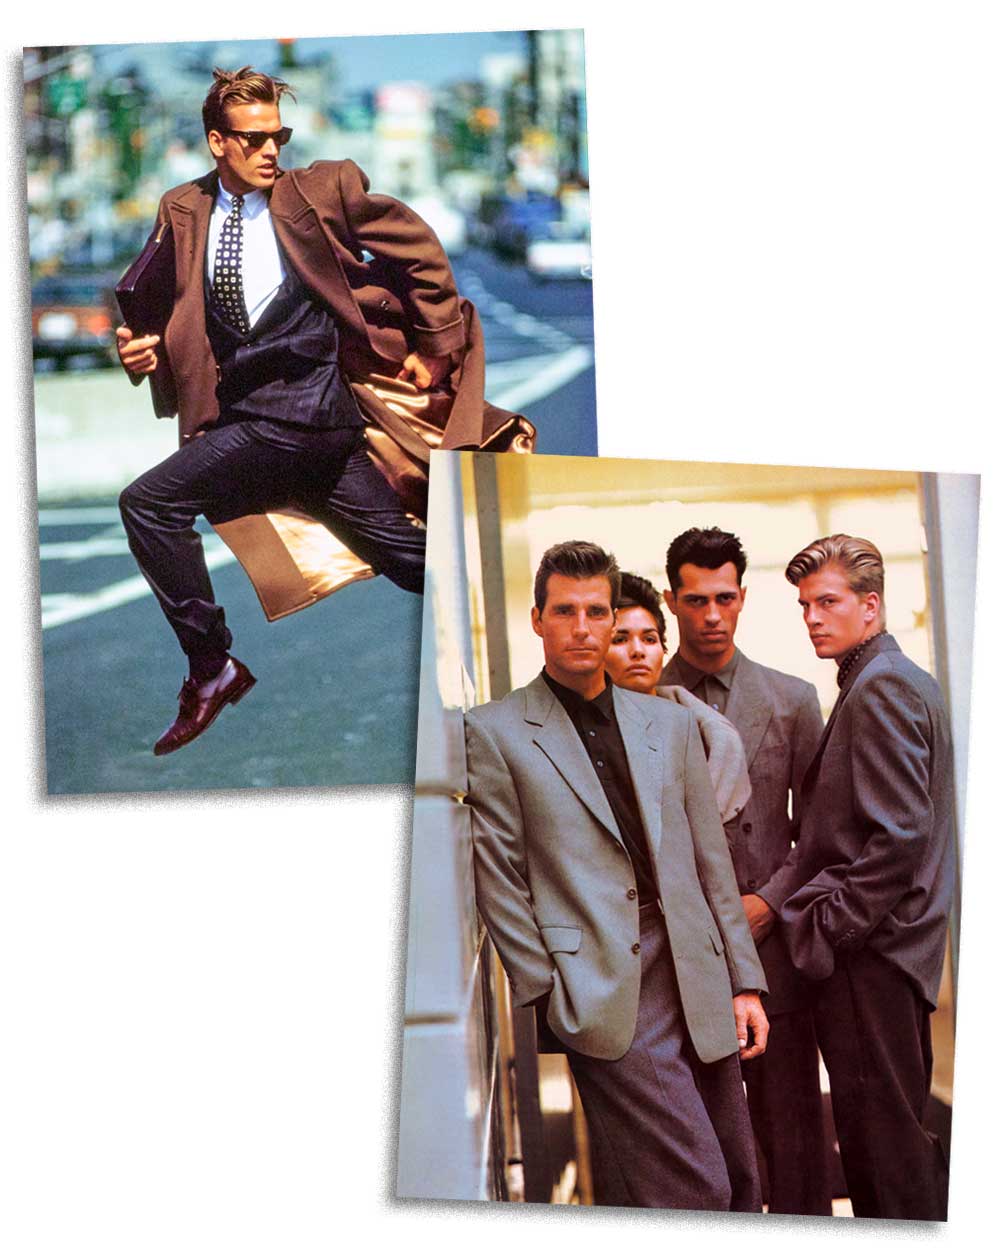 Power dressing in the 80s fashion for men